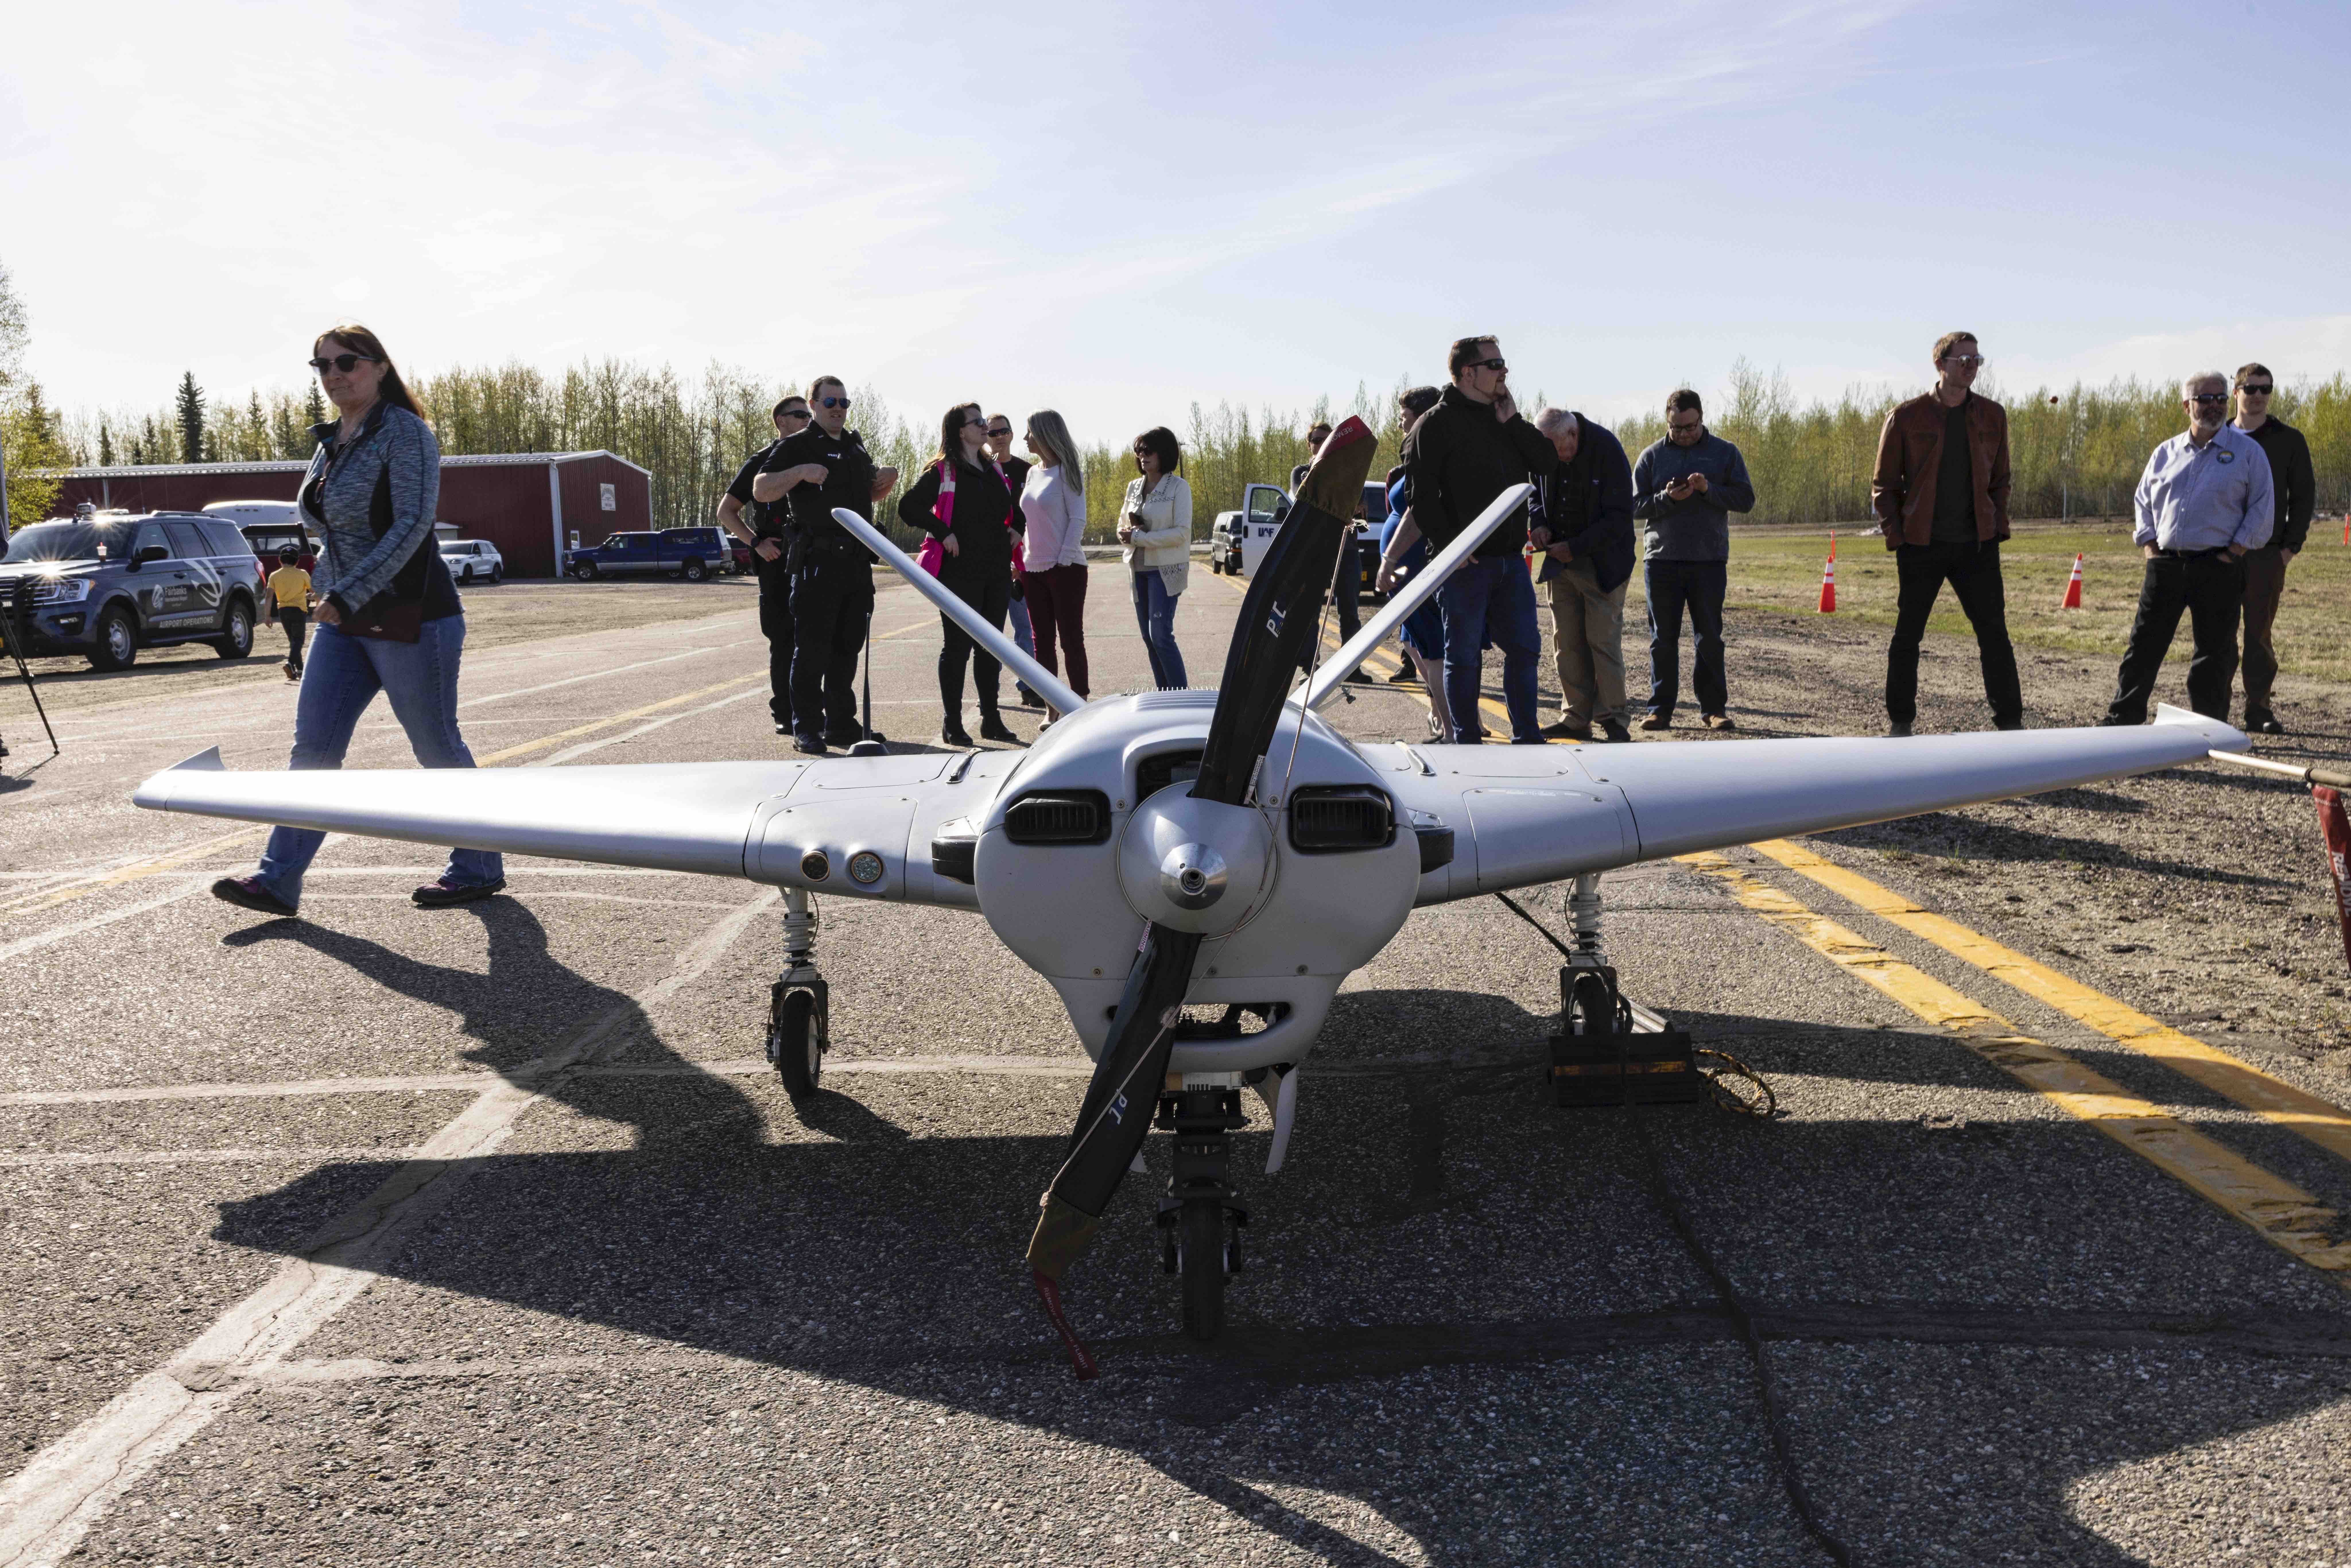 Sentry unmanned aircraft